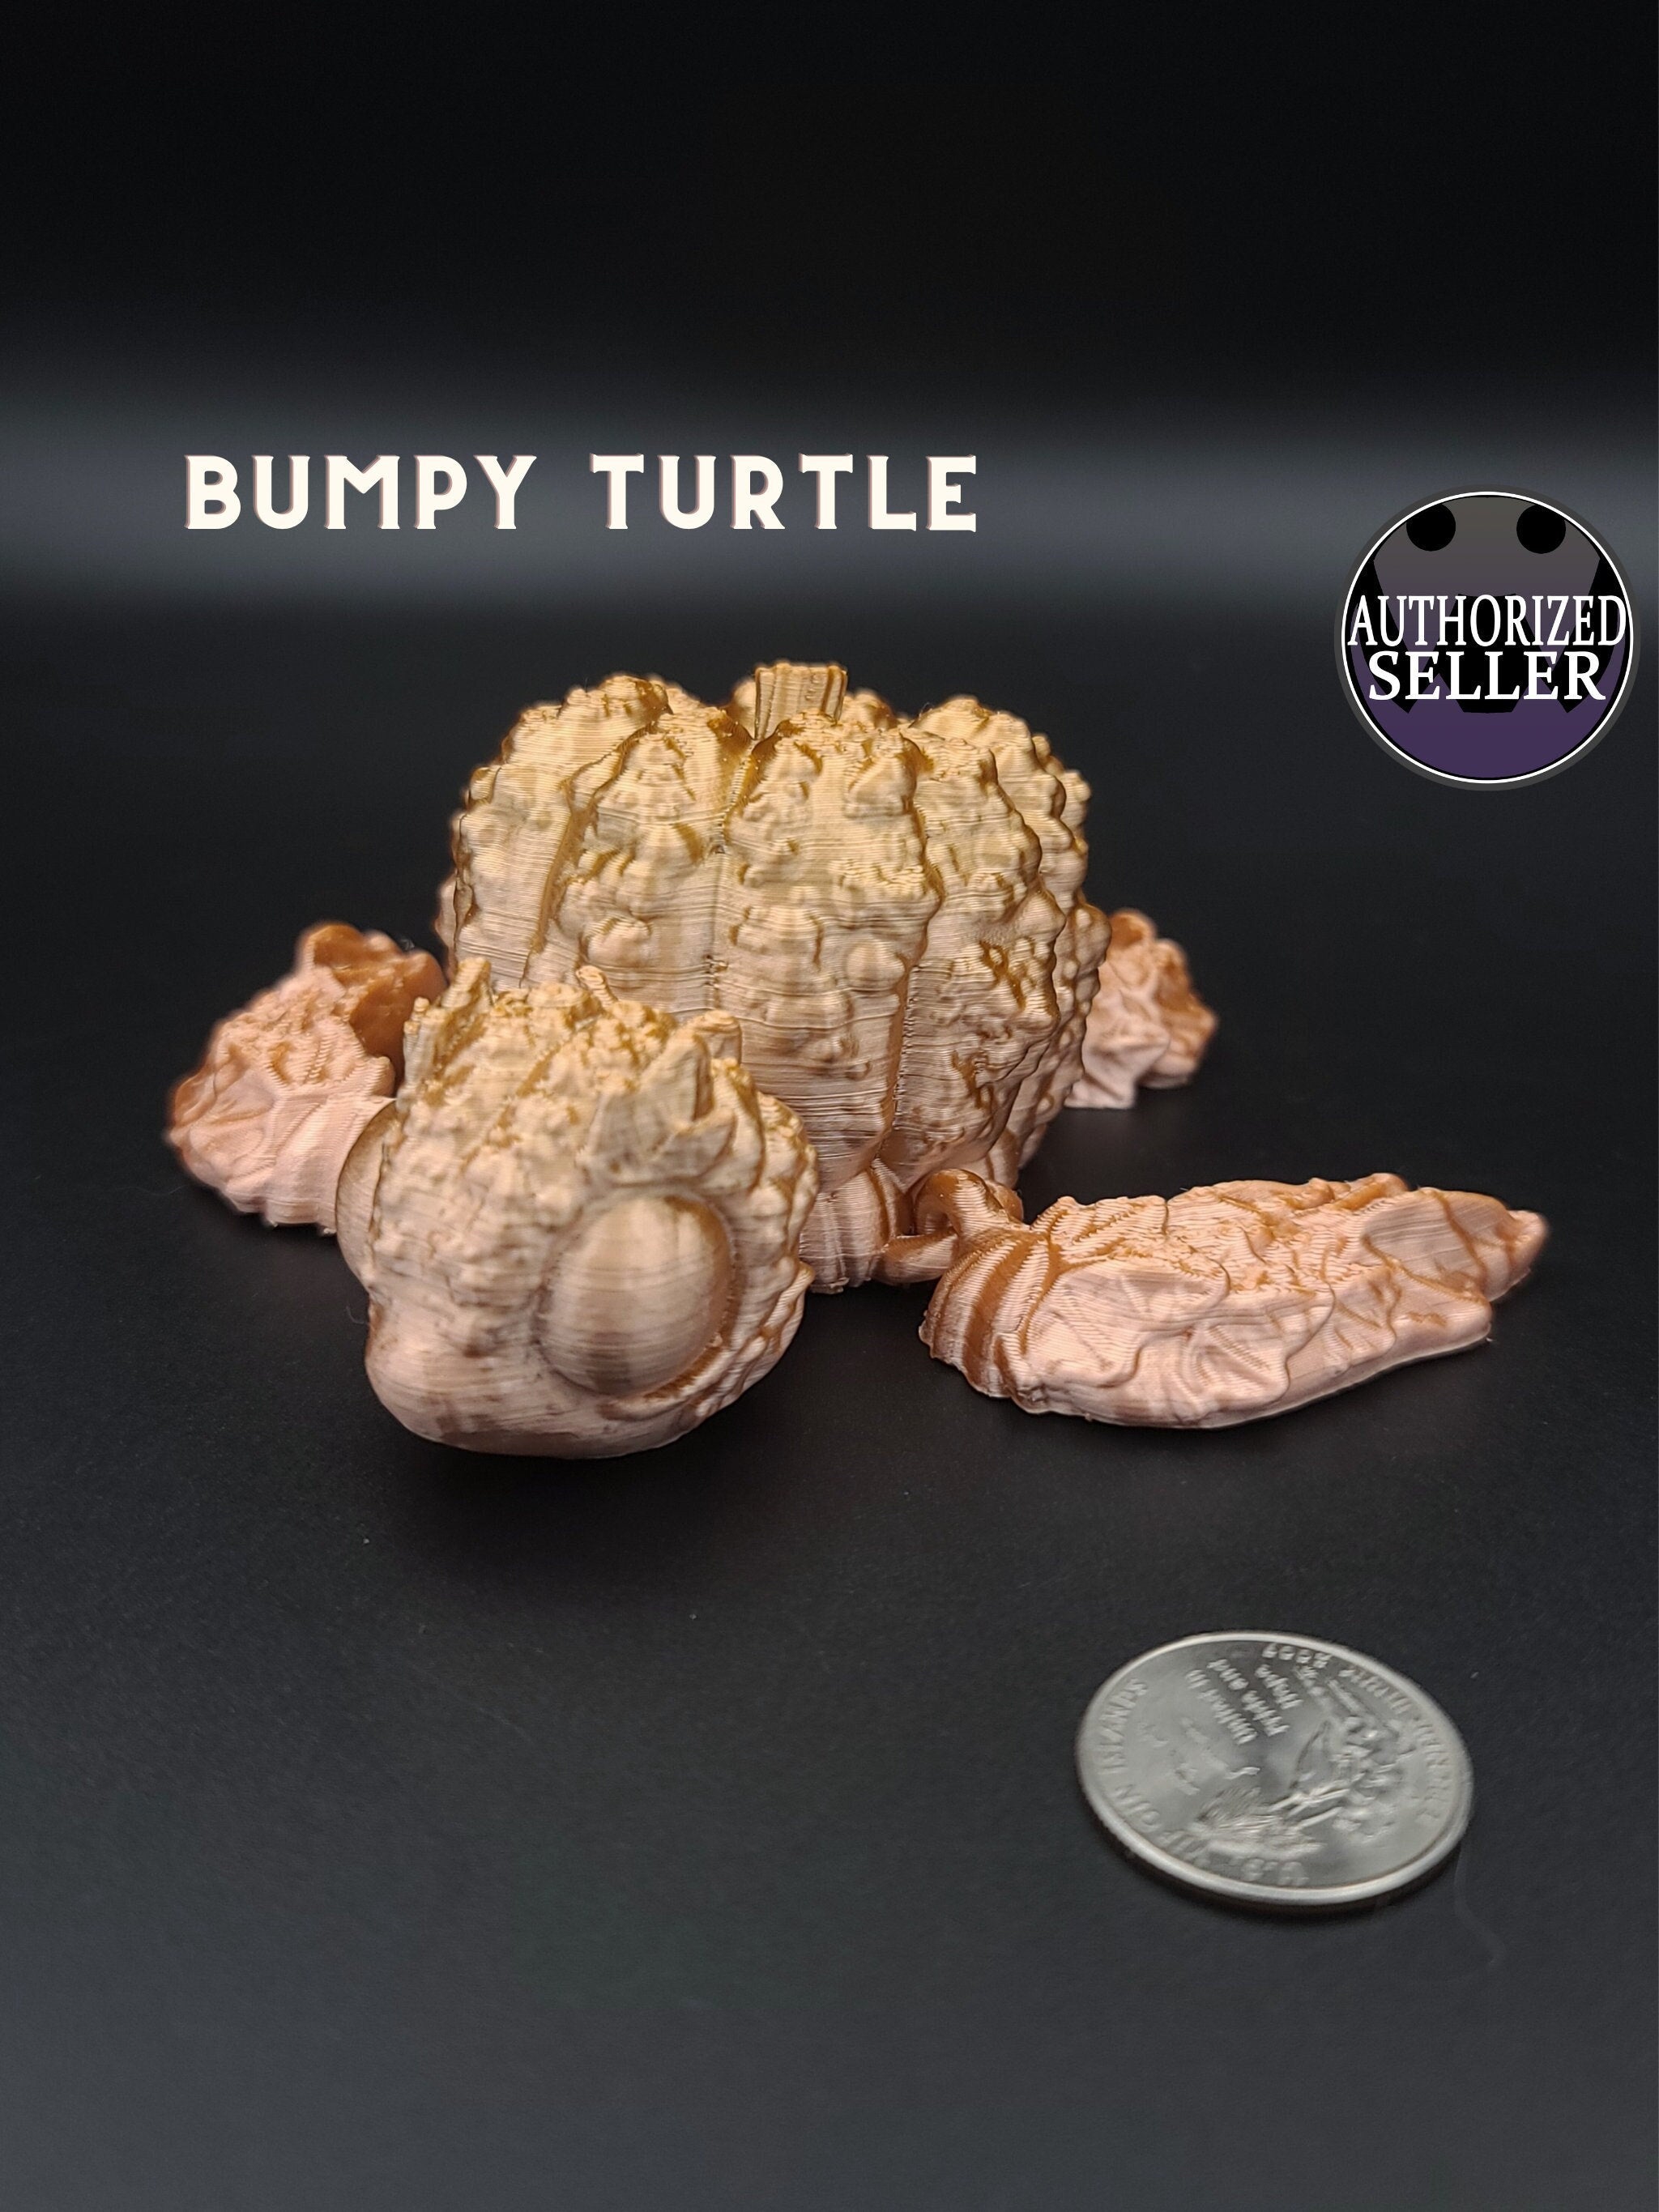 3D printed Multi Color Articulating Pumpkin Turtle. Flexi, Fidget Bumpkinurtle adult toy. 4.5 inch. Adorable turtle buddy. Great gift!